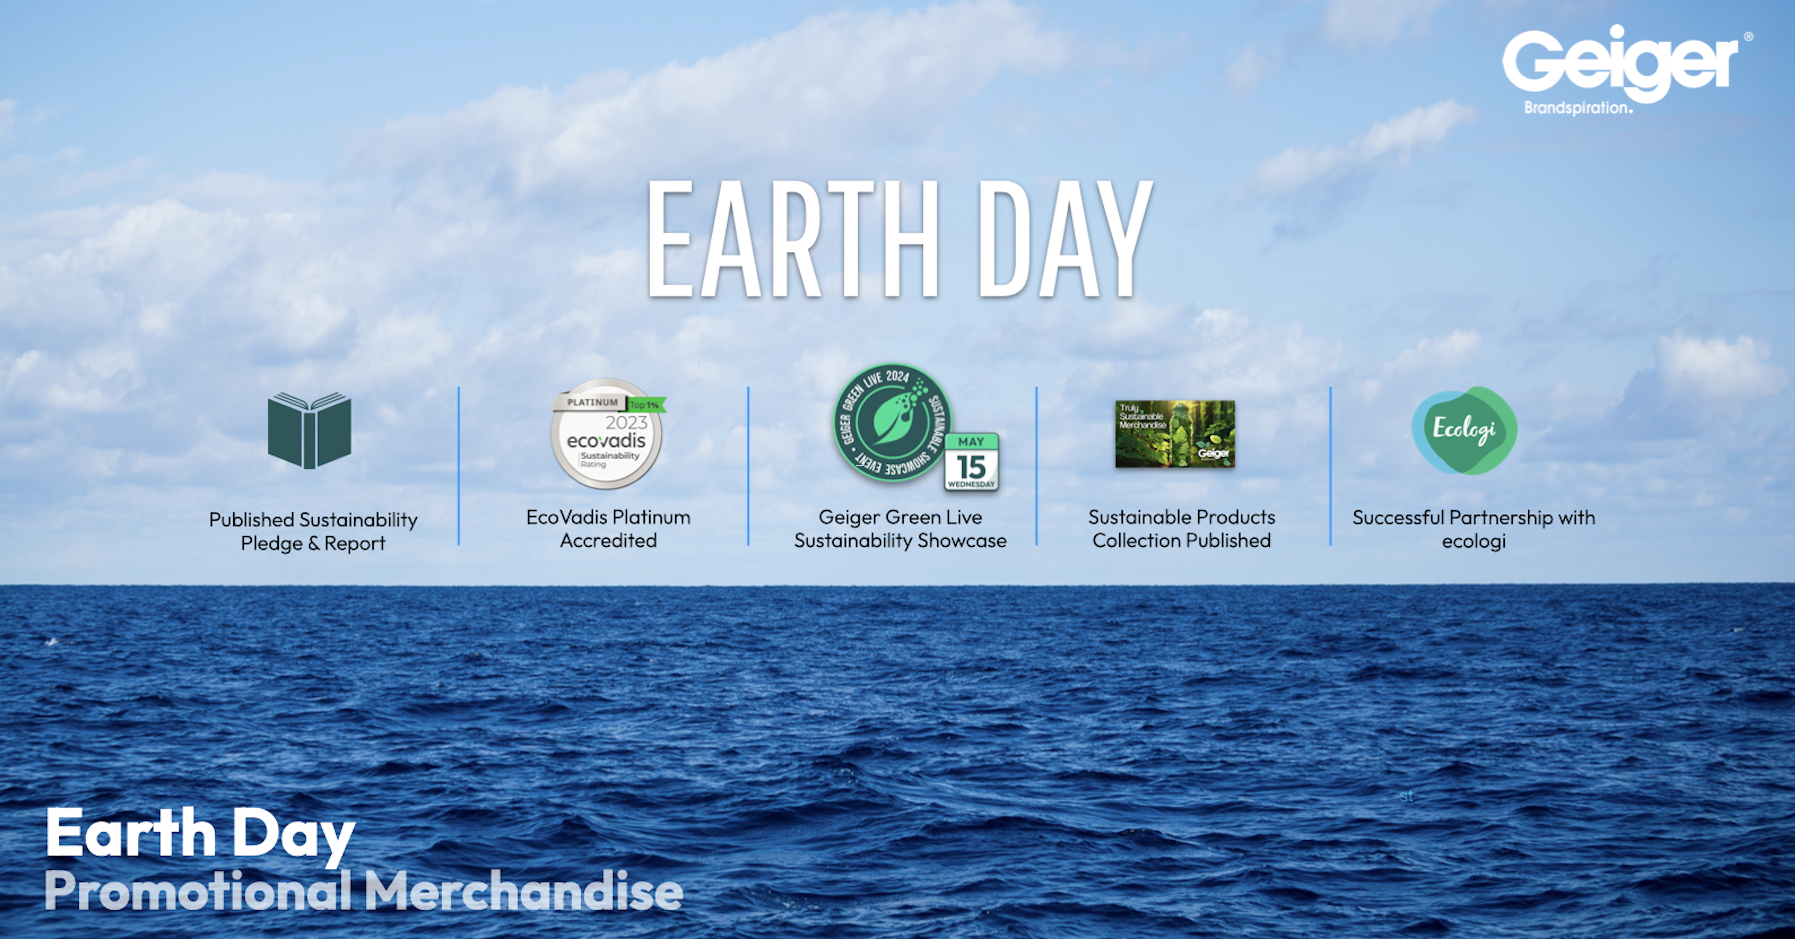 sustainable promotional merchandise this earth day from Geiger promotional products 